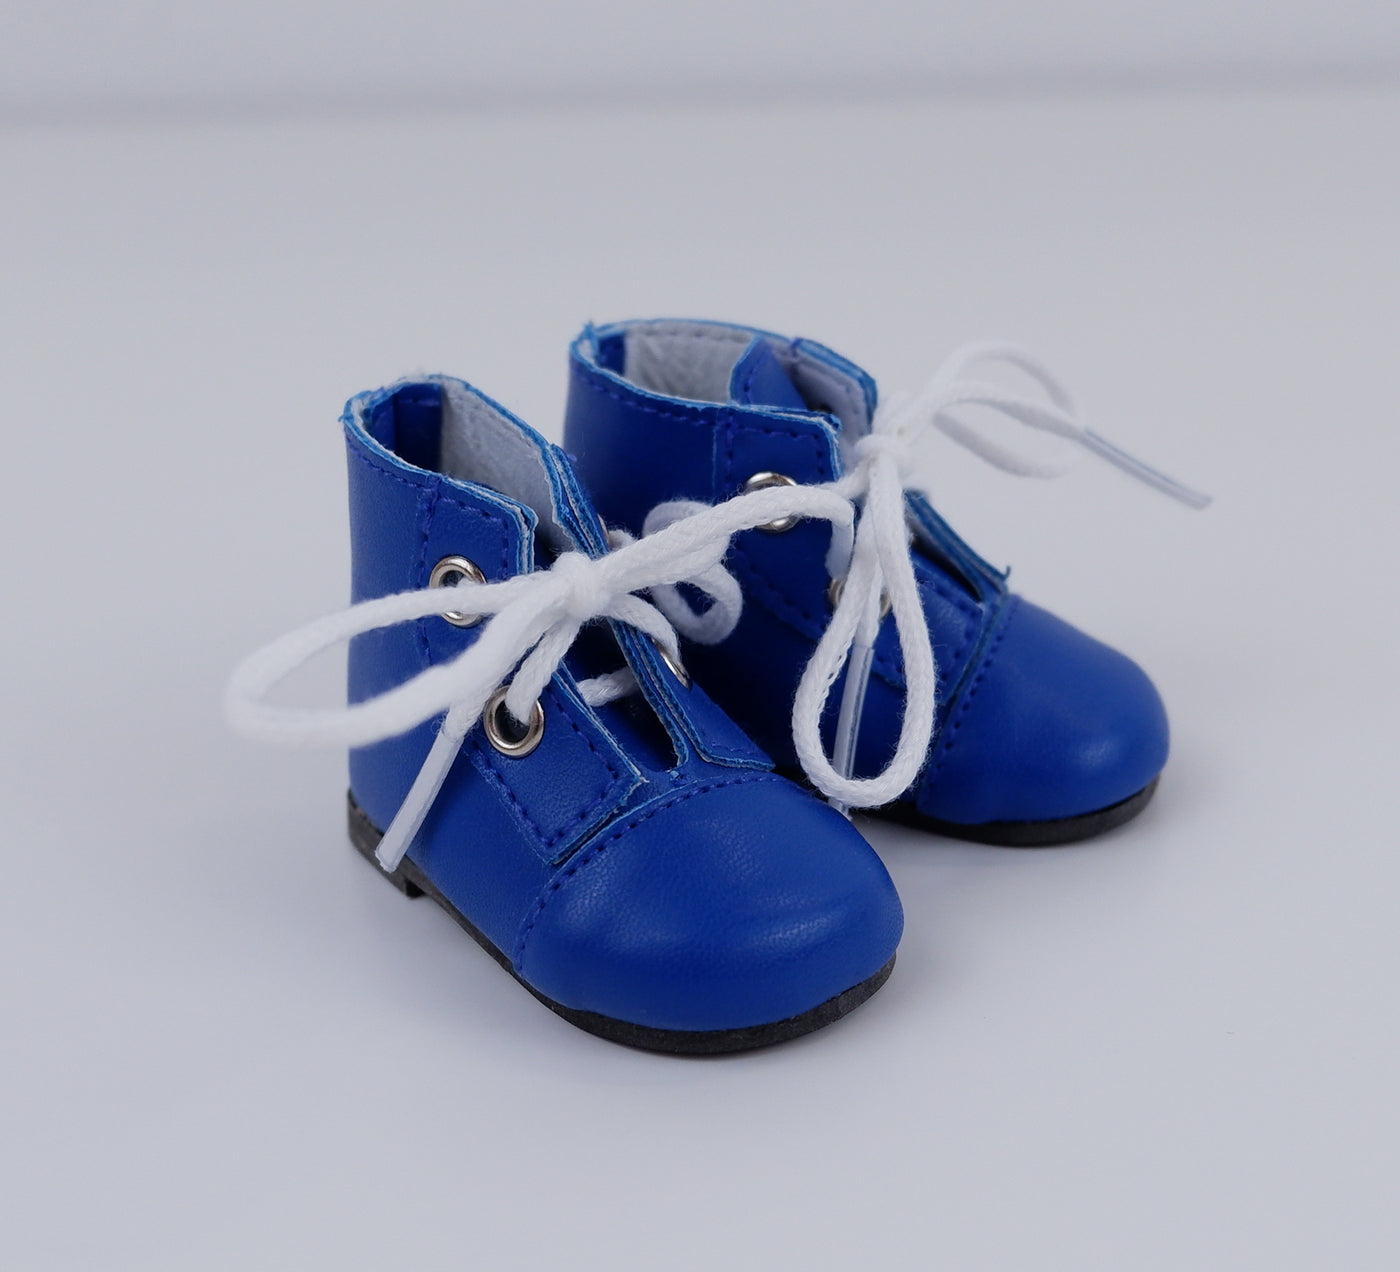 Ankle Lace Up Boots - Sapphire Blue